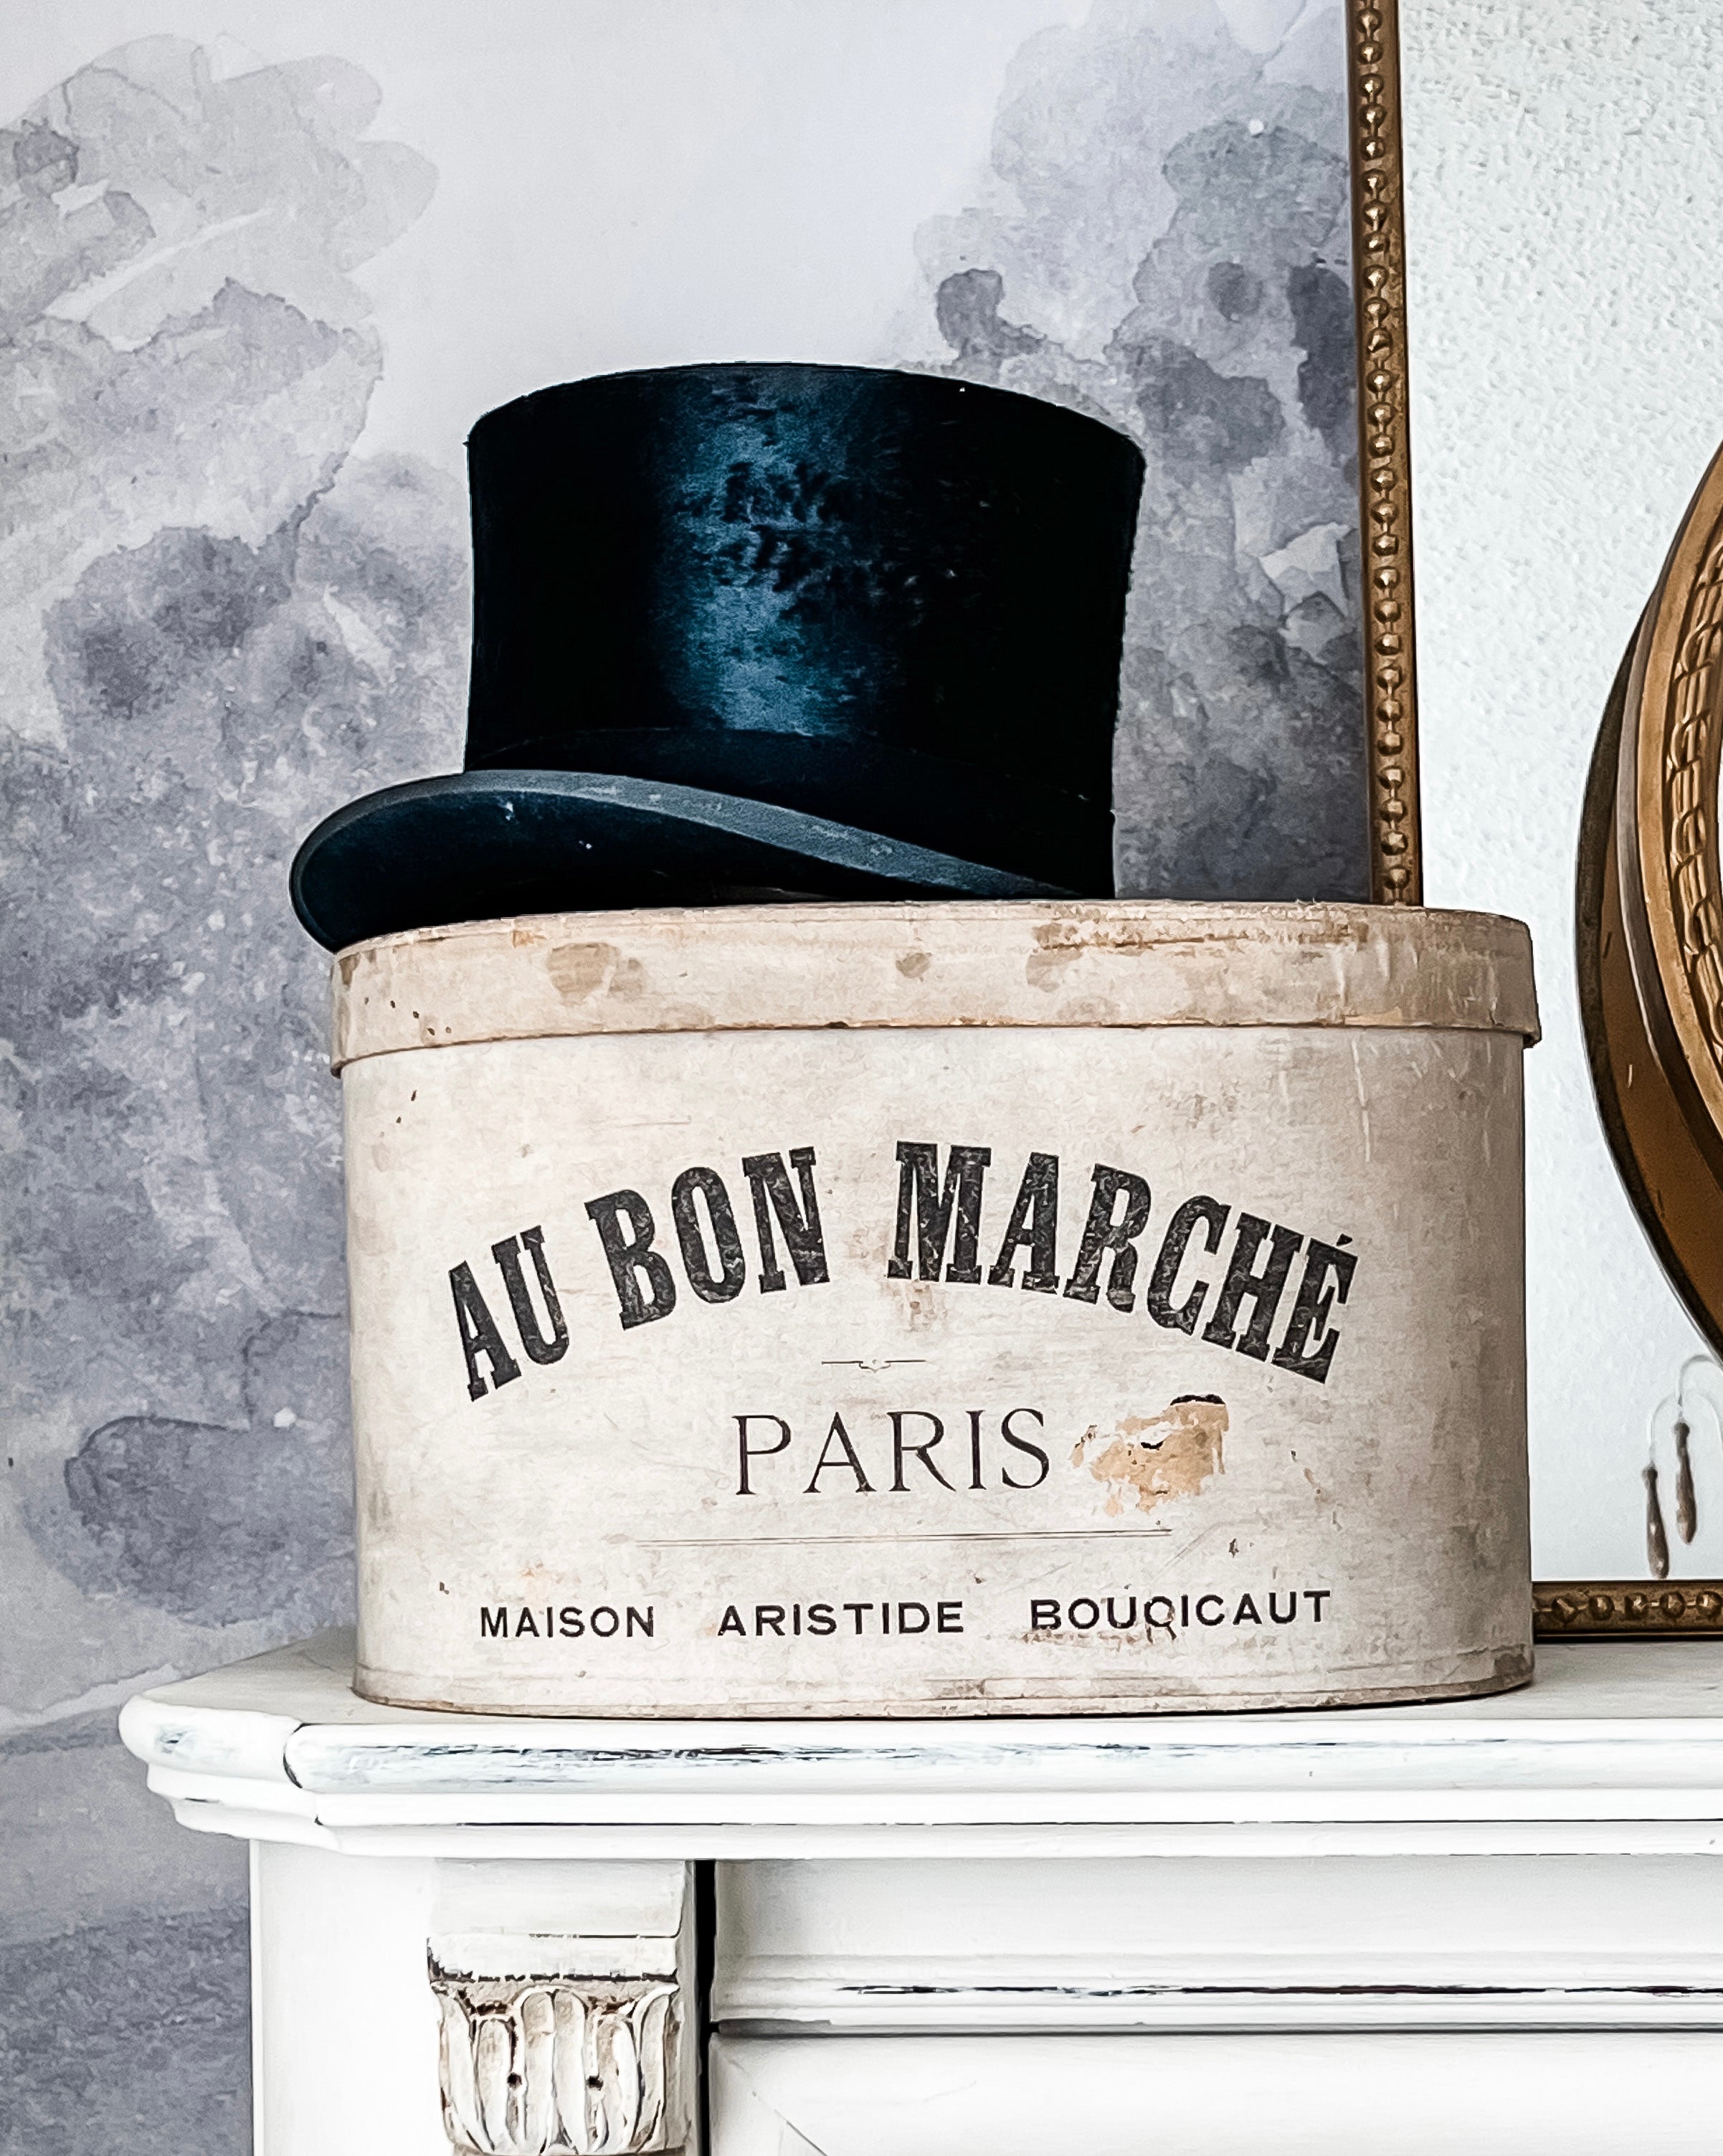 Mid-19th Century French Oval Pigskin Leather Top Hat Box from Paris